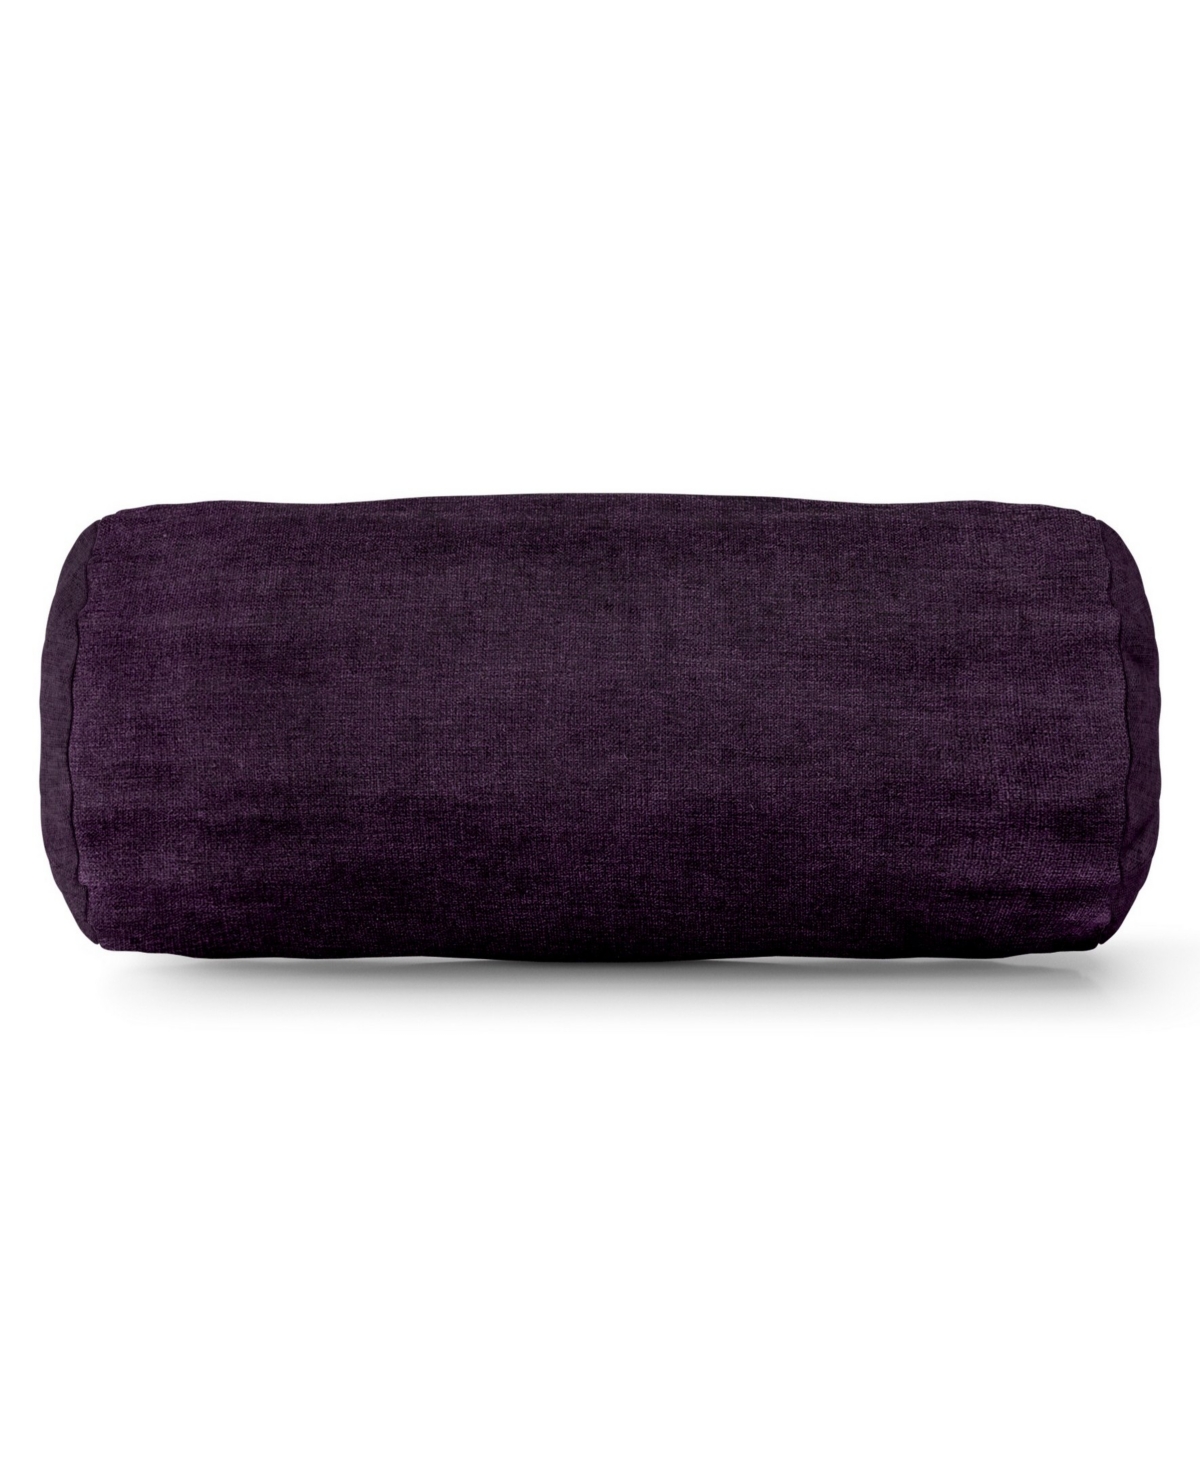 UPC 859072620339 product image for Majestic Home Goods Villa Bolster Decorative Pillow, 8